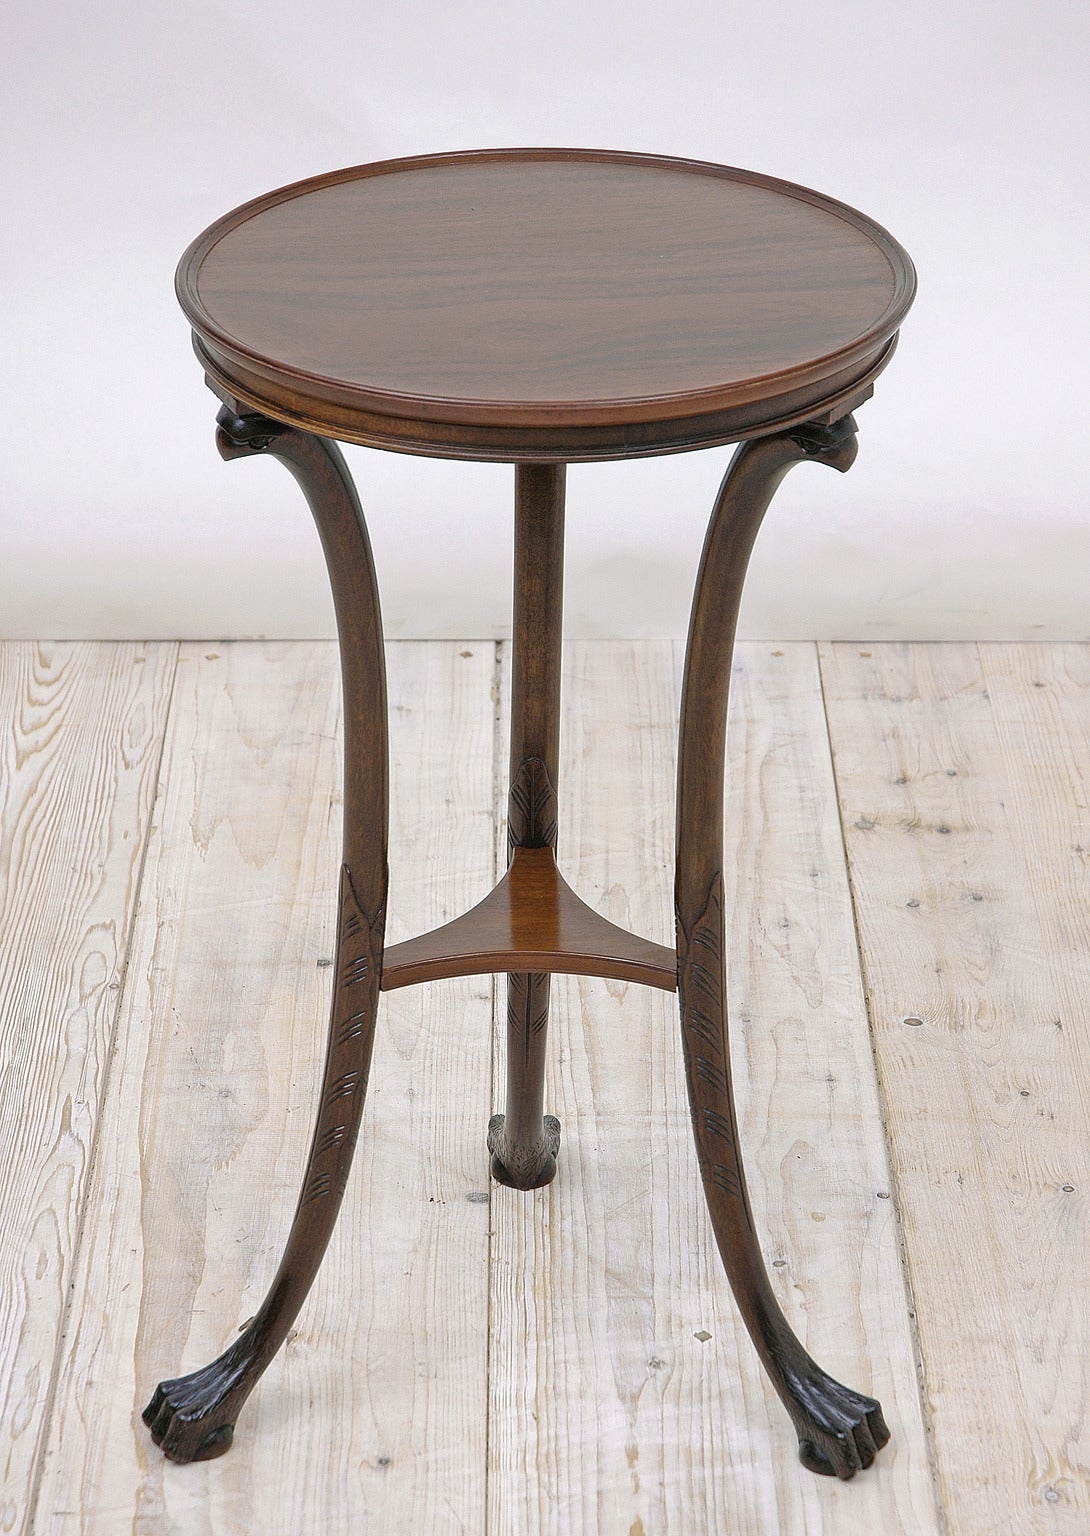 Federal Pair of Round Tripod Tables in Mahogany